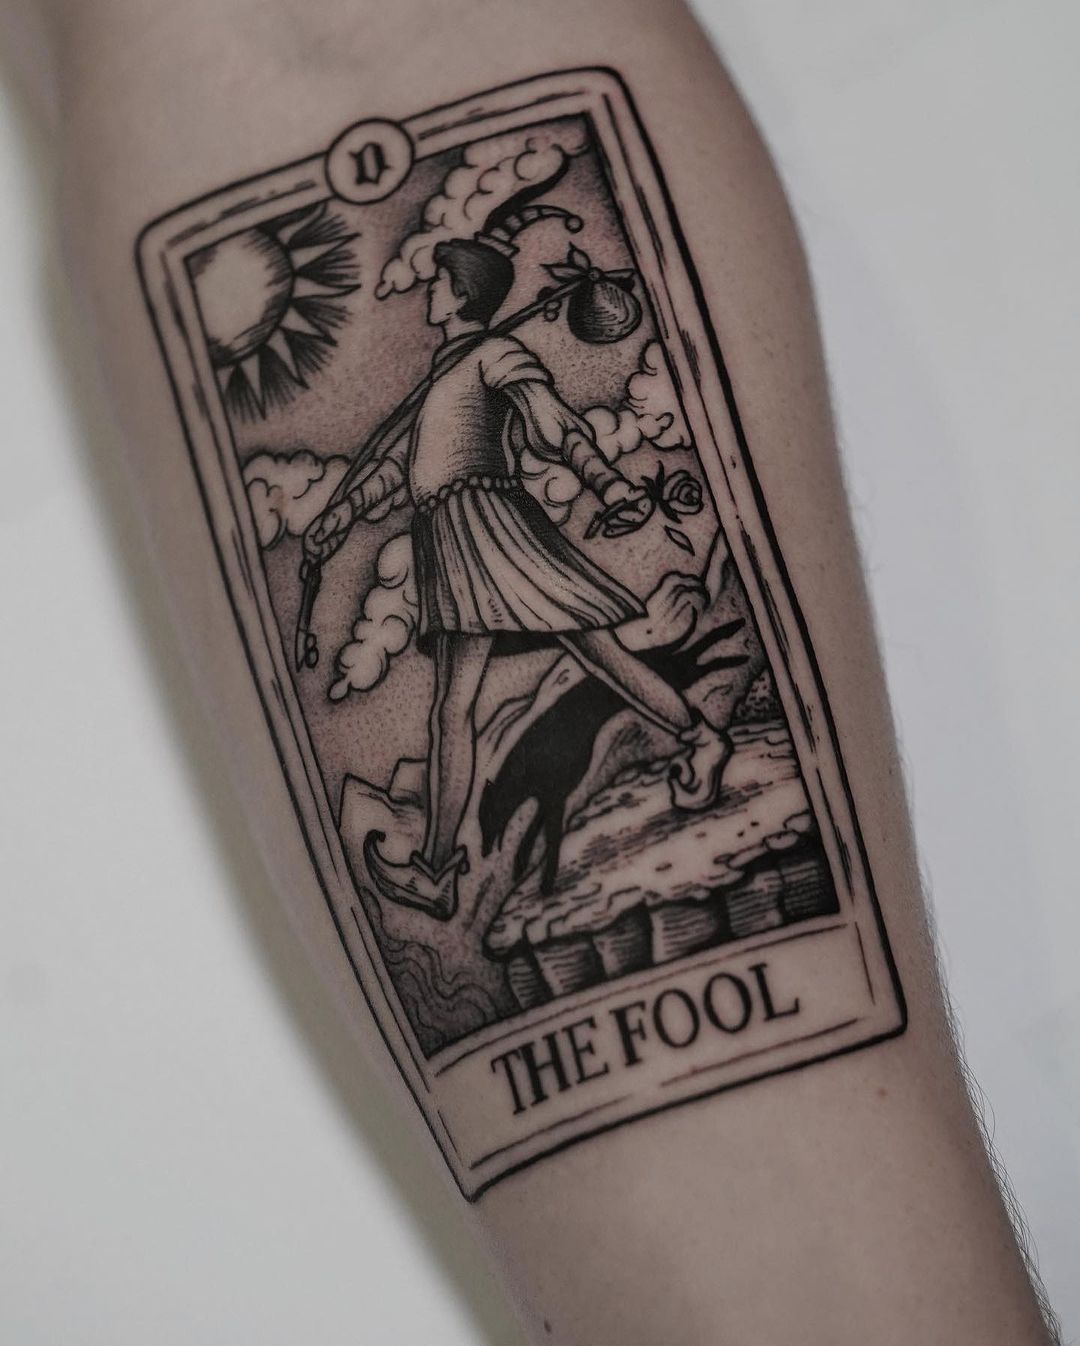 15 Tarot Card tattoos that will inspire you